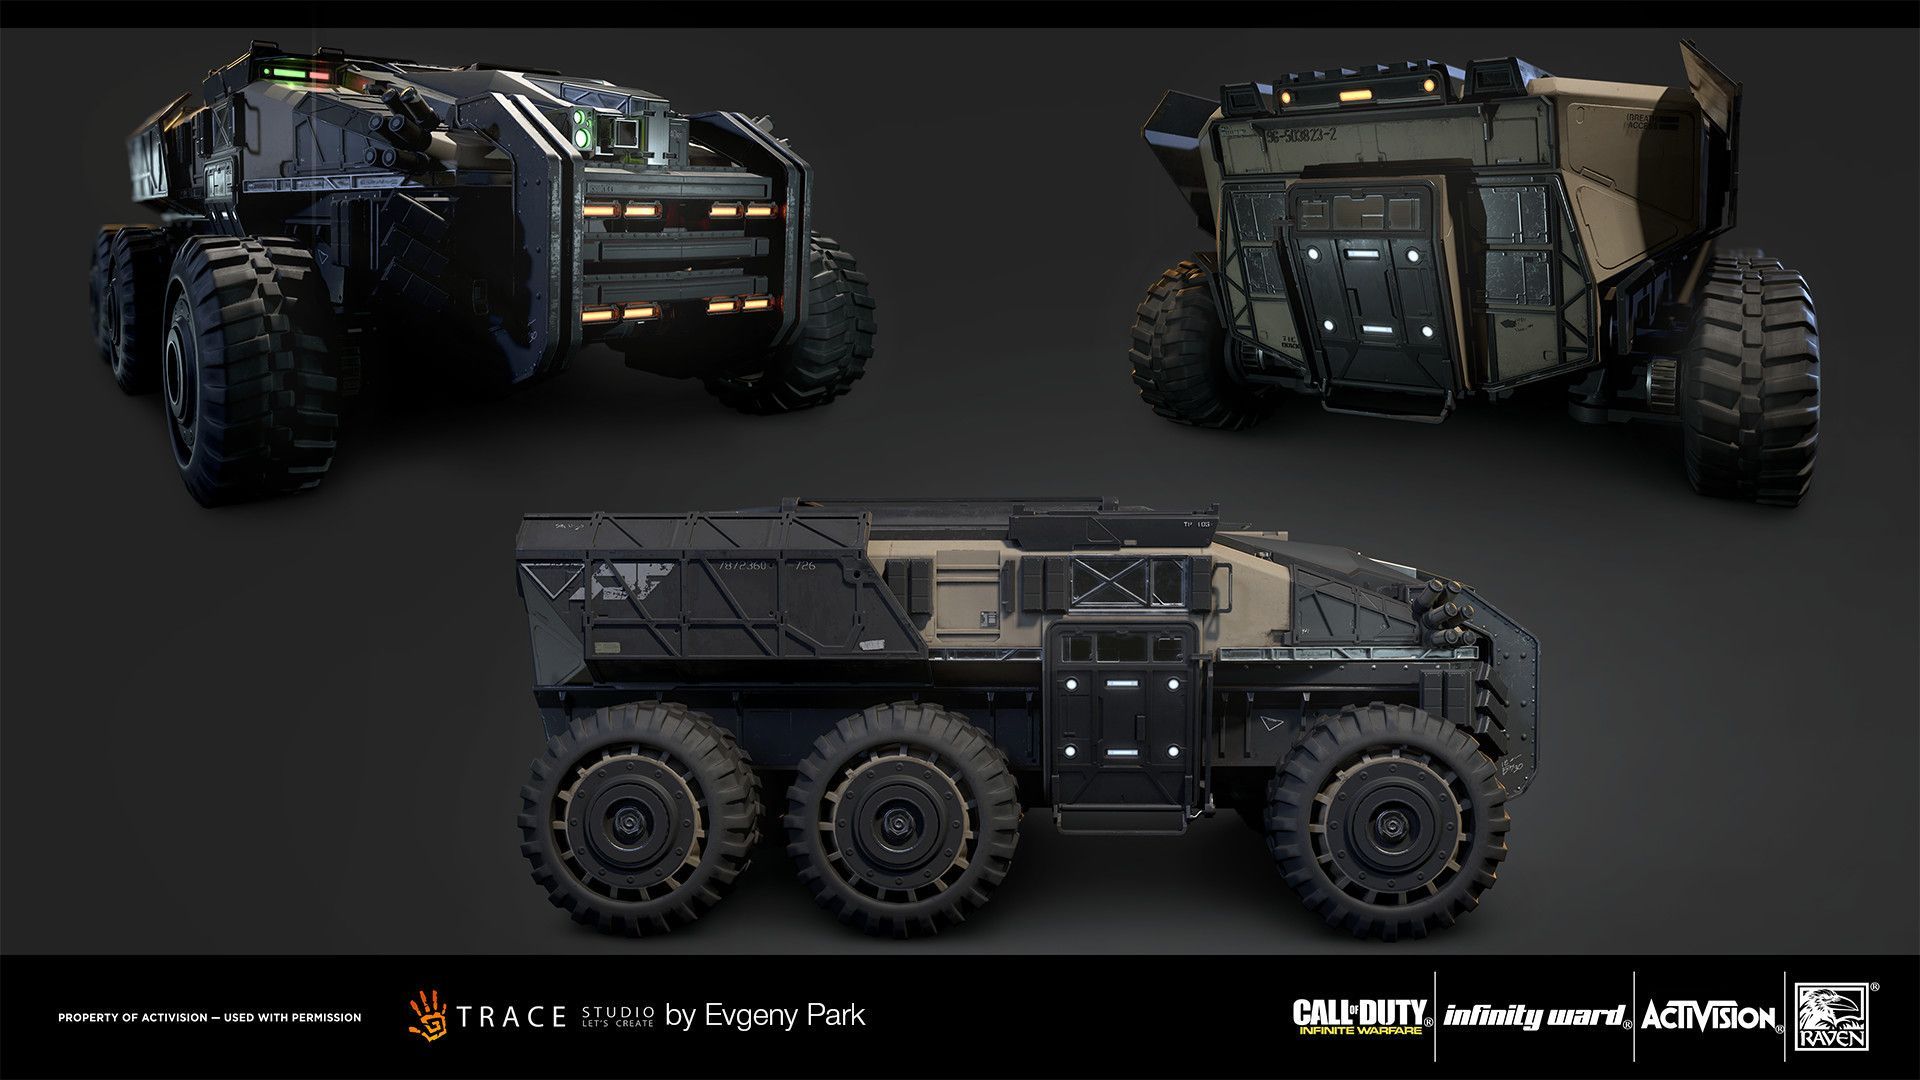 Assets for Call of Duty Infinite Warfare, Evgeny Park. Call of duty infinite, Infinite warfare, Call of duty